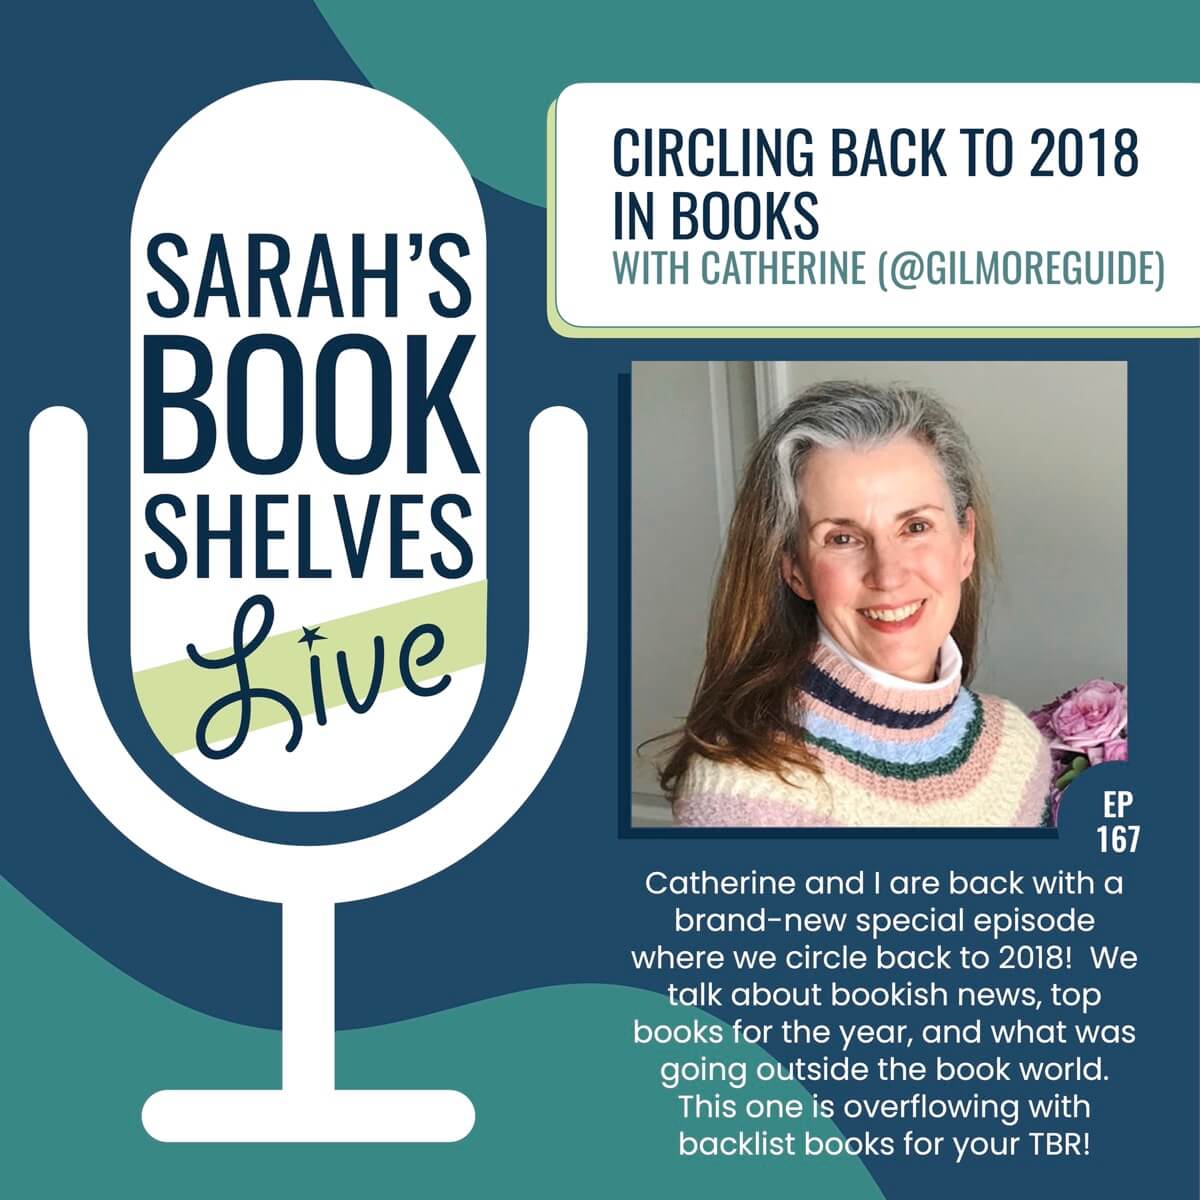 Circling Back to 2018 in Books